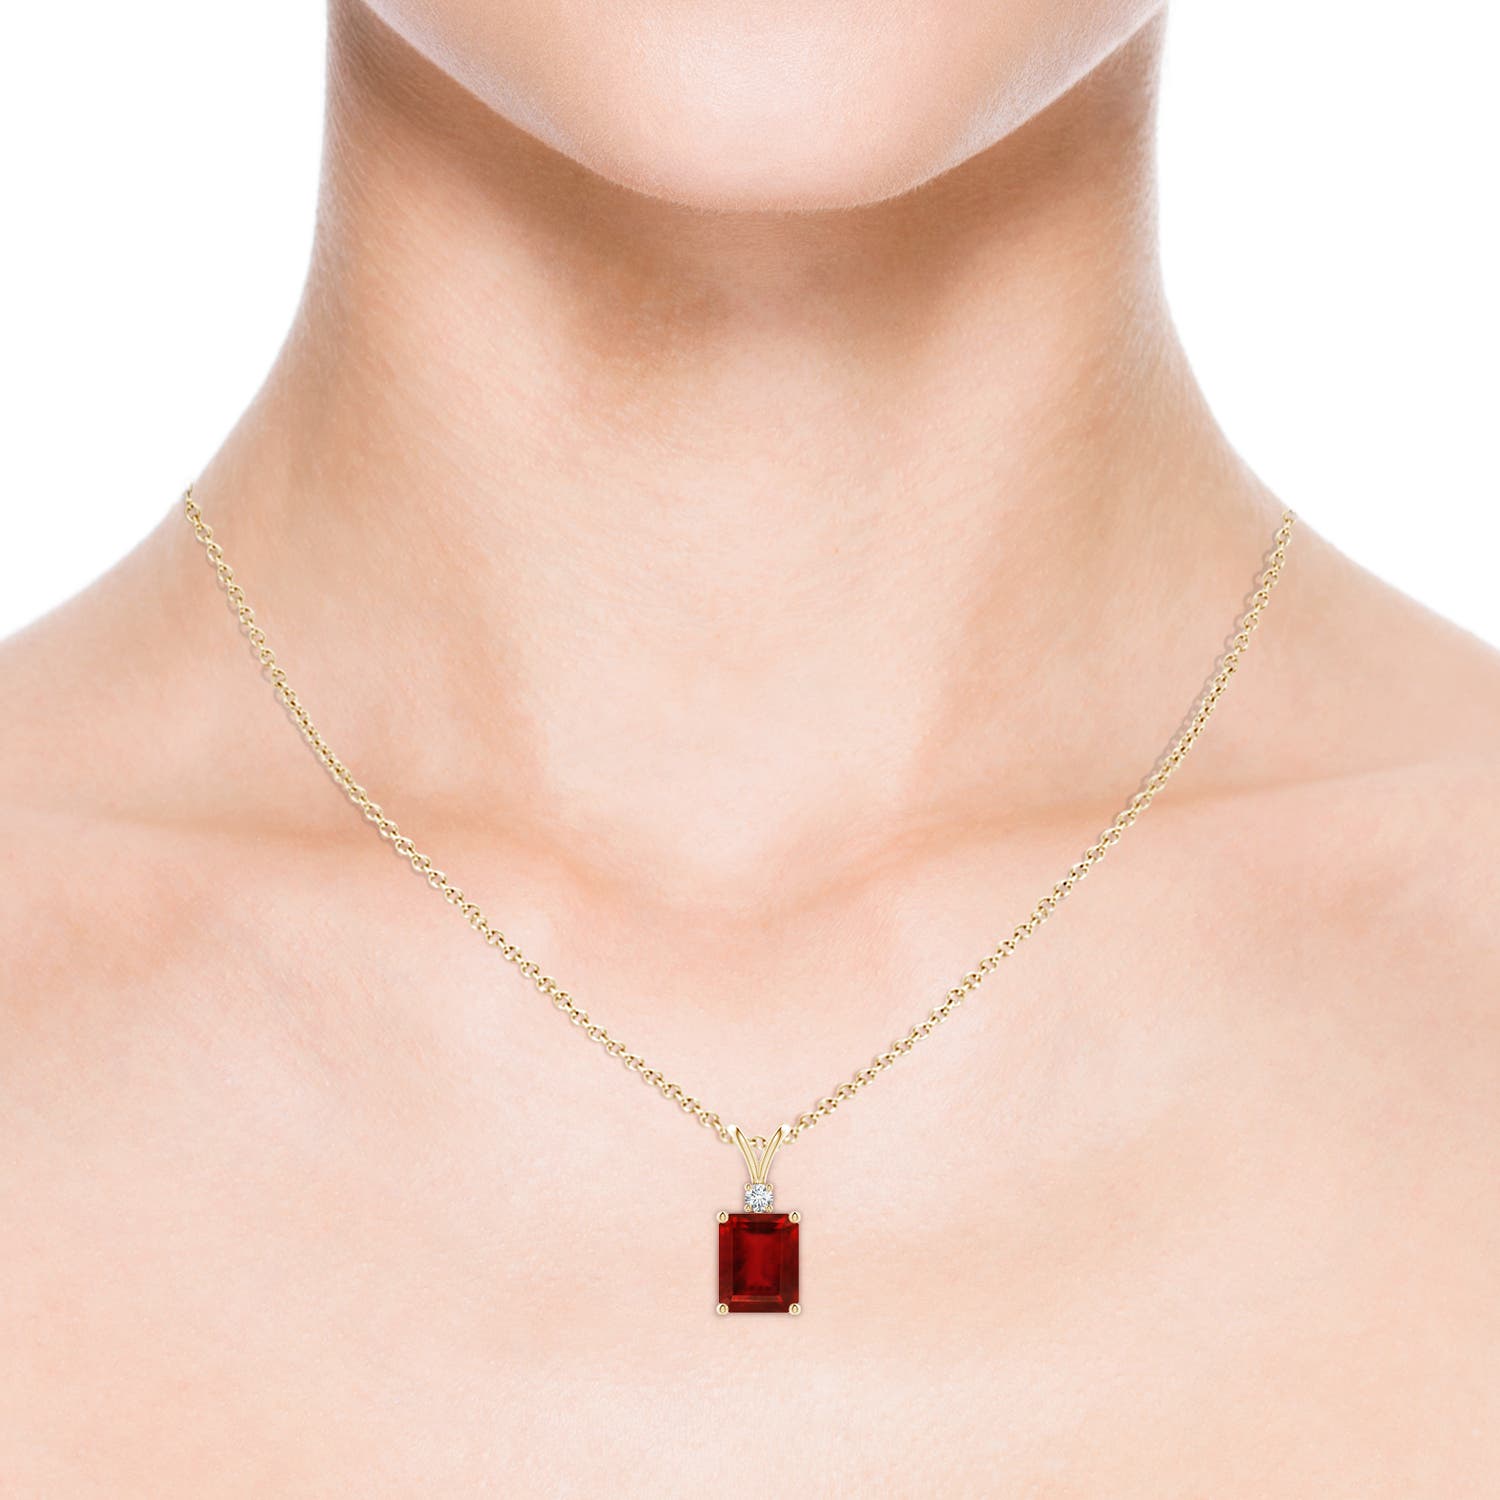 AAAA - Ruby / 4.11 CT / 14 KT Yellow Gold